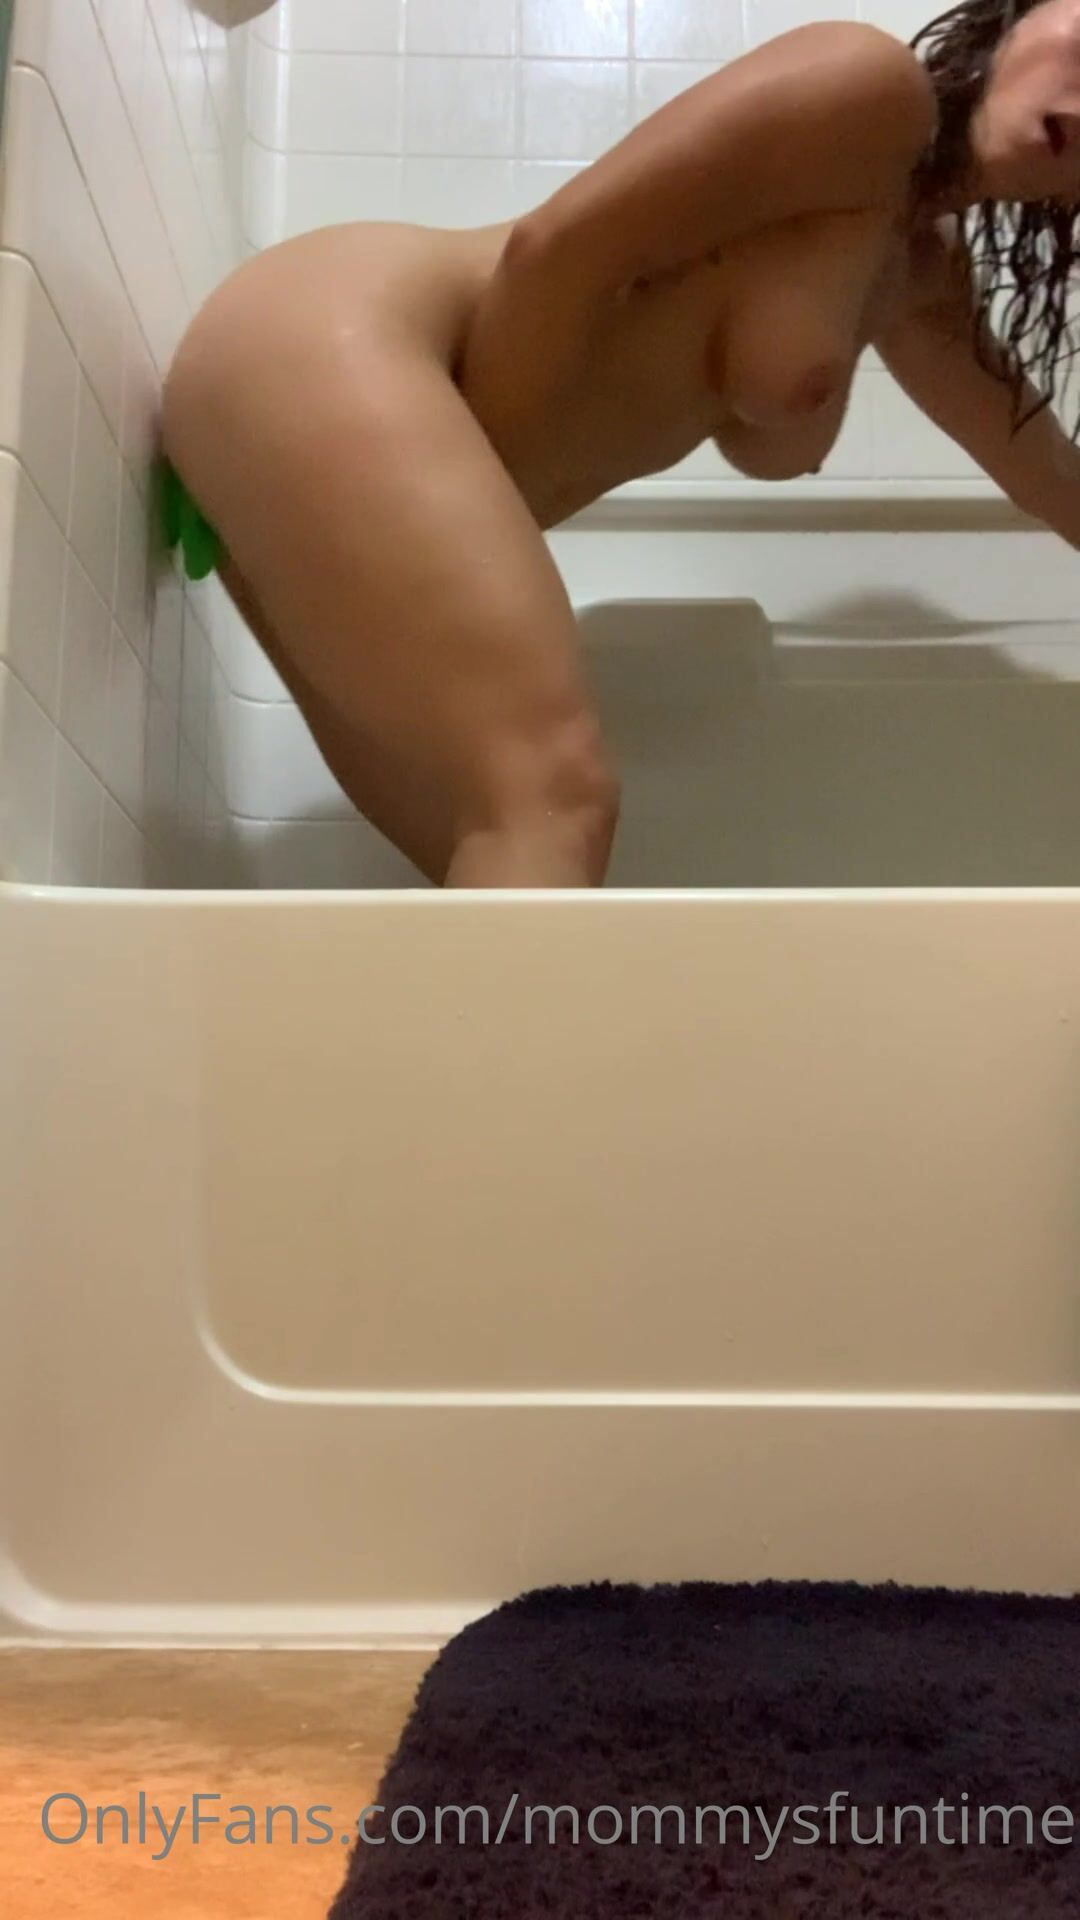 Mommysfuntime shower play